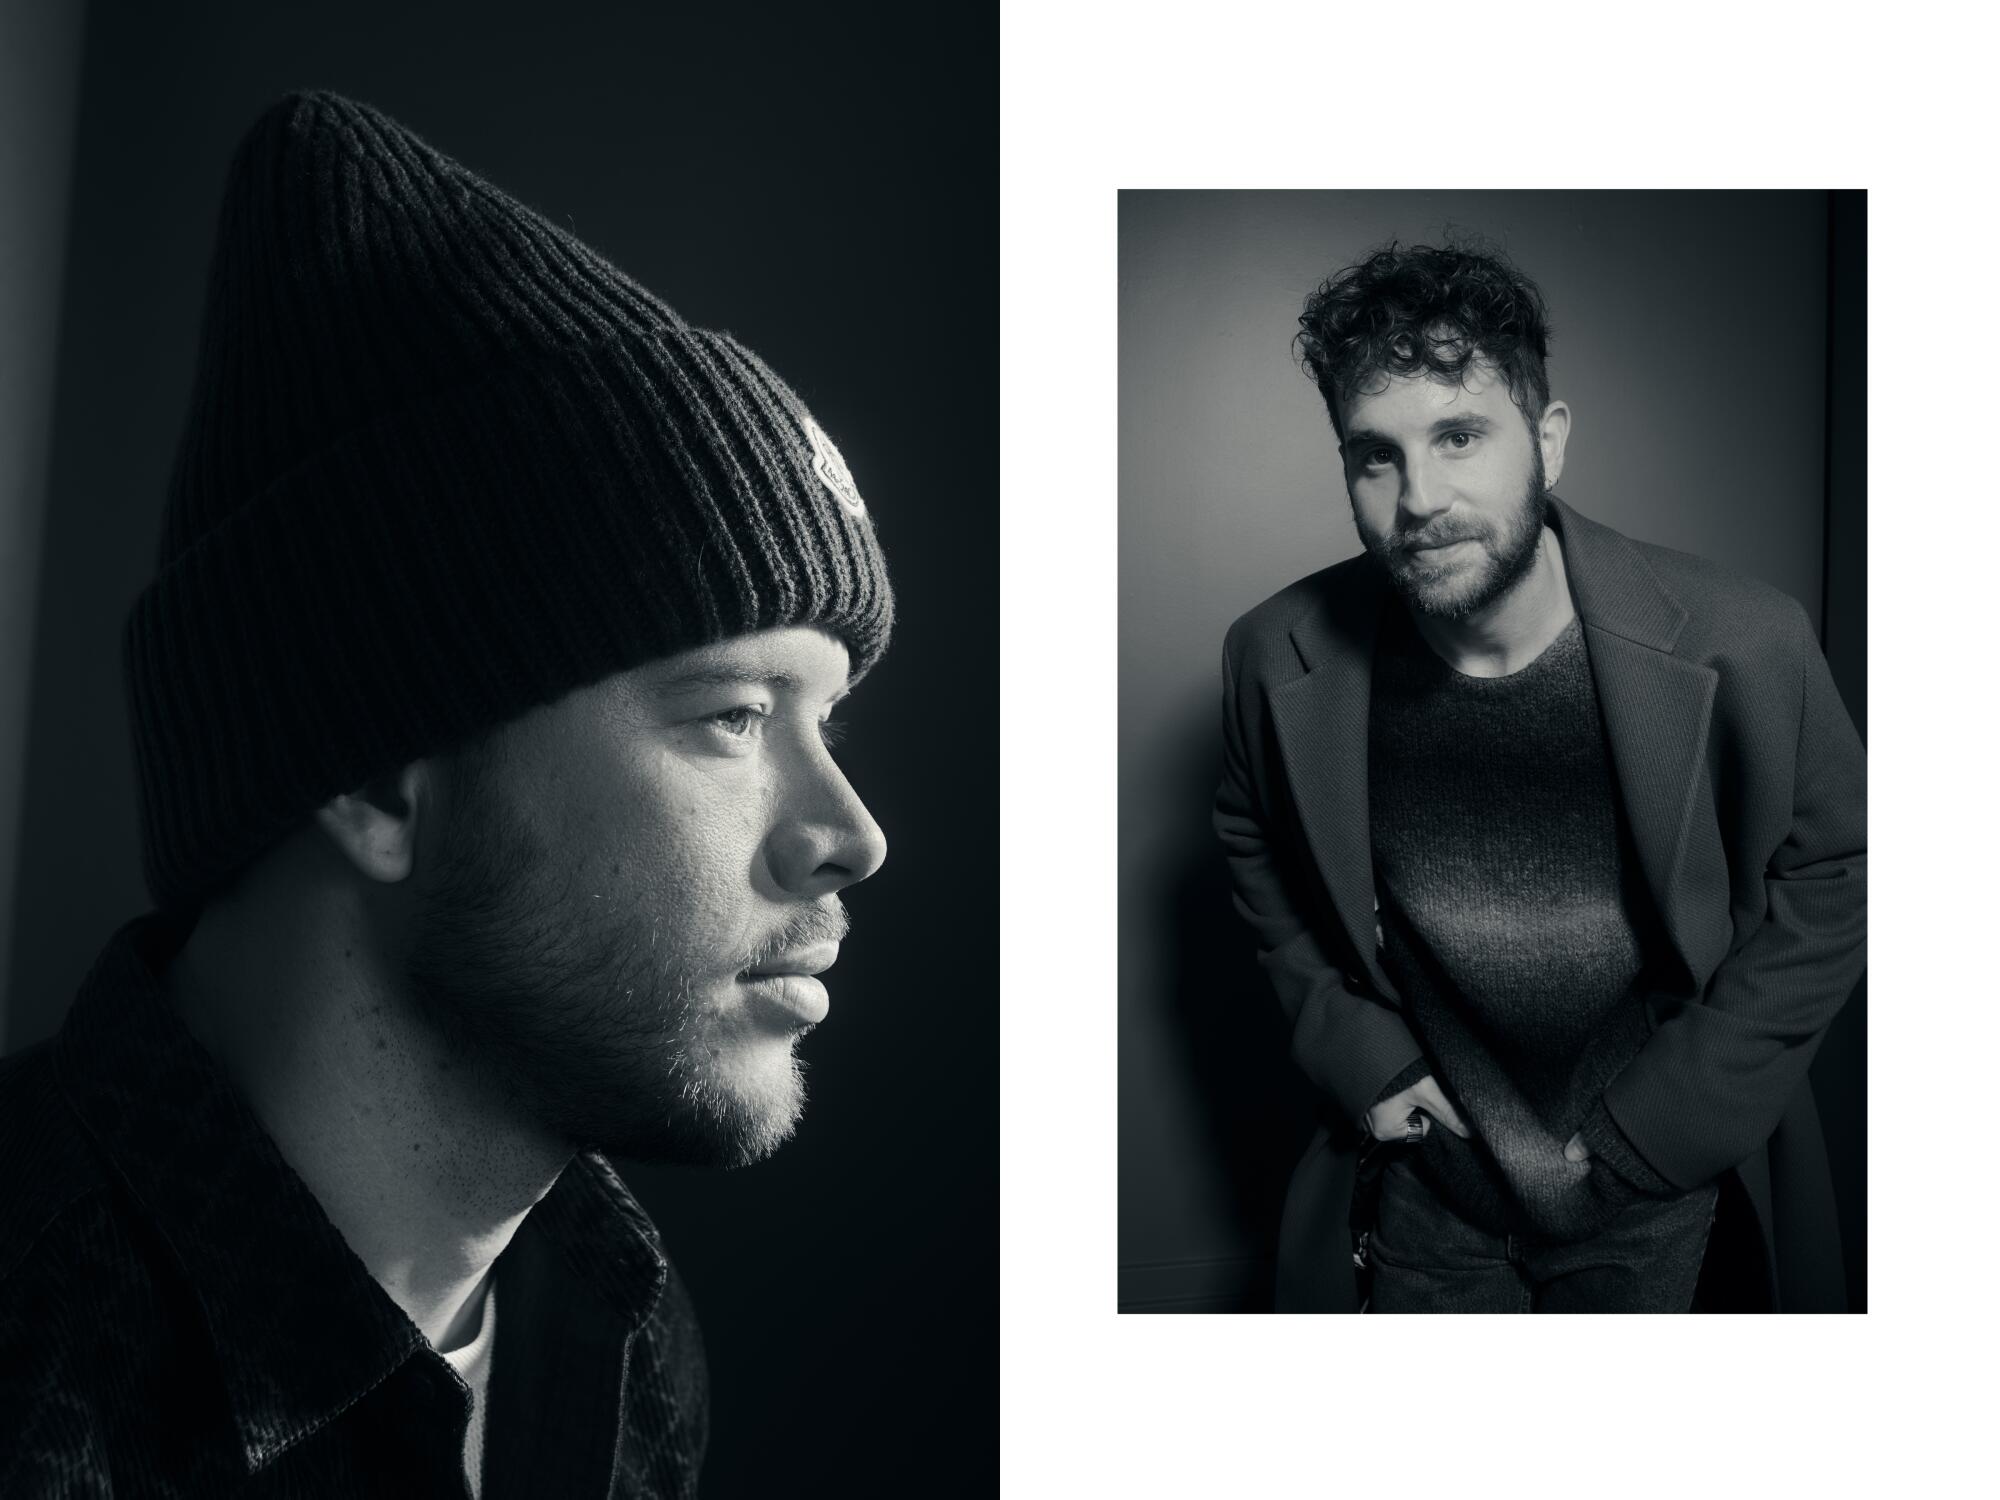 A man in a winter cap in profile and a man in a sweater jacket